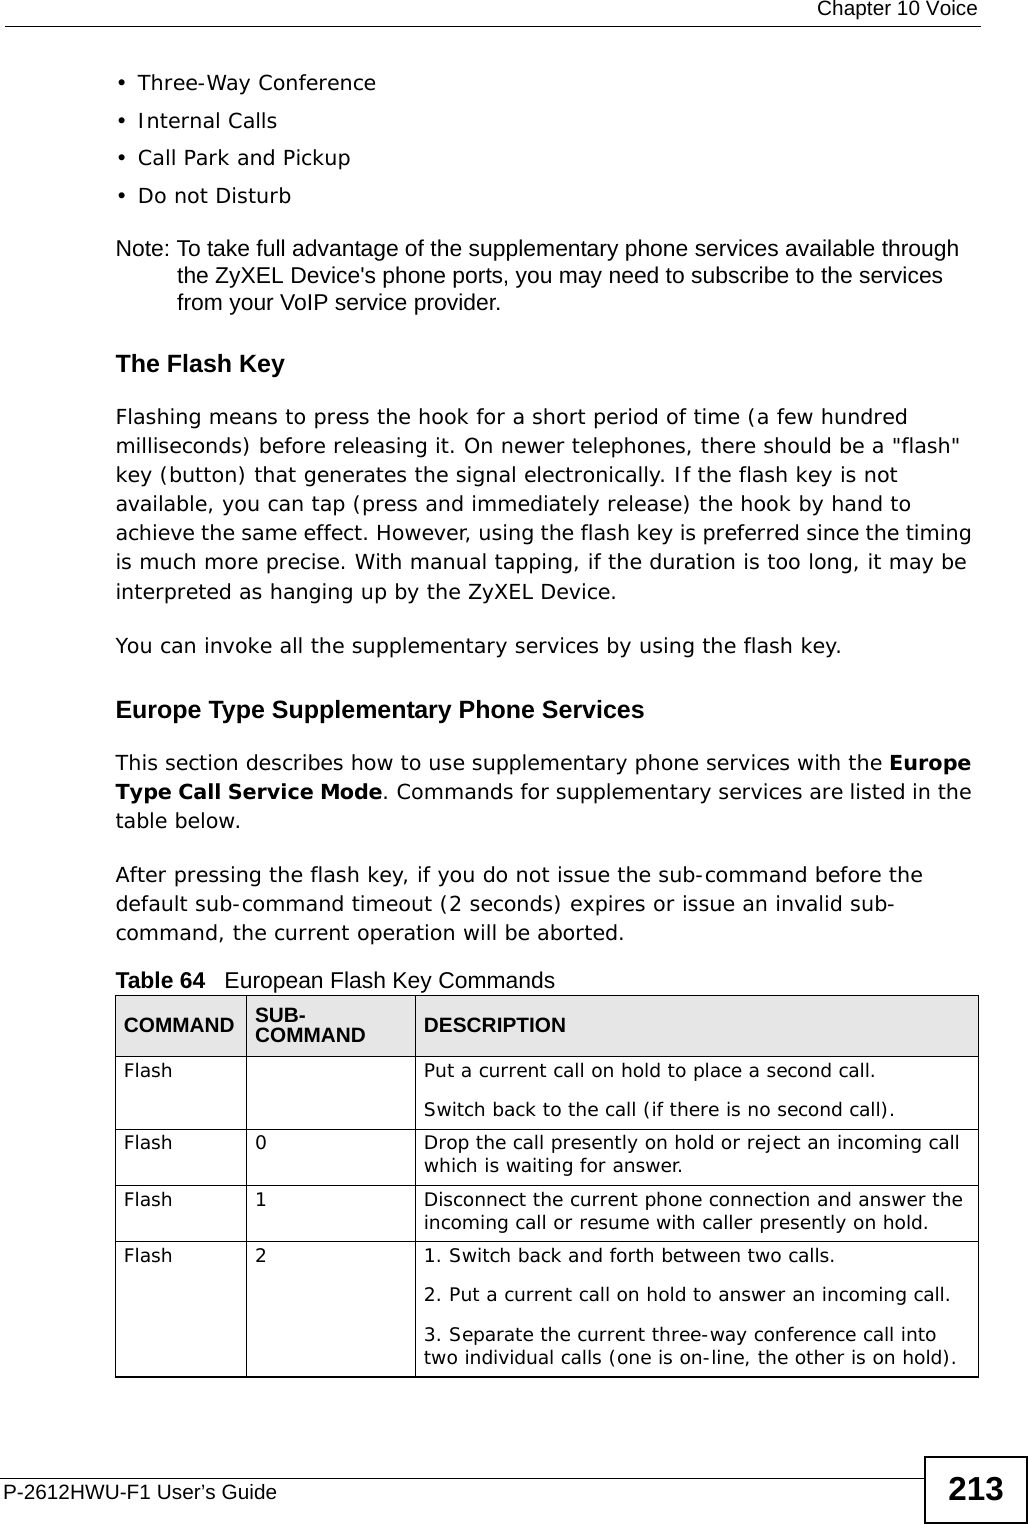  Chapter 10 VoiceP-2612HWU-F1 User’s Guide 213• Three-Way Conference•Internal Calls• Call Park and Pickup•Do not DisturbNote: To take full advantage of the supplementary phone services available through the ZyXEL Device&apos;s phone ports, you may need to subscribe to the services from your VoIP service provider.The Flash KeyFlashing means to press the hook for a short period of time (a few hundred milliseconds) before releasing it. On newer telephones, there should be a &quot;flash&quot; key (button) that generates the signal electronically. If the flash key is not available, you can tap (press and immediately release) the hook by hand to achieve the same effect. However, using the flash key is preferred since the timing is much more precise. With manual tapping, if the duration is too long, it may be interpreted as hanging up by the ZyXEL Device.You can invoke all the supplementary services by using the flash key. Europe Type Supplementary Phone ServicesThis section describes how to use supplementary phone services with the Europe Type Call Service Mode. Commands for supplementary services are listed in the table below.After pressing the flash key, if you do not issue the sub-command before the default sub-command timeout (2 seconds) expires or issue an invalid sub-command, the current operation will be aborted.Table 64   European Flash Key CommandsCOMMAND SUB-COMMAND DESCRIPTIONFlash  Put a current call on hold to place a second call.Switch back to the call (if there is no second call).Flash 0 Drop the call presently on hold or reject an incoming call which is waiting for answer.Flash 1 Disconnect the current phone connection and answer the incoming call or resume with caller presently on hold.Flash 2 1. Switch back and forth between two calls.2. Put a current call on hold to answer an incoming call.3. Separate the current three-way conference call into two individual calls (one is on-line, the other is on hold).